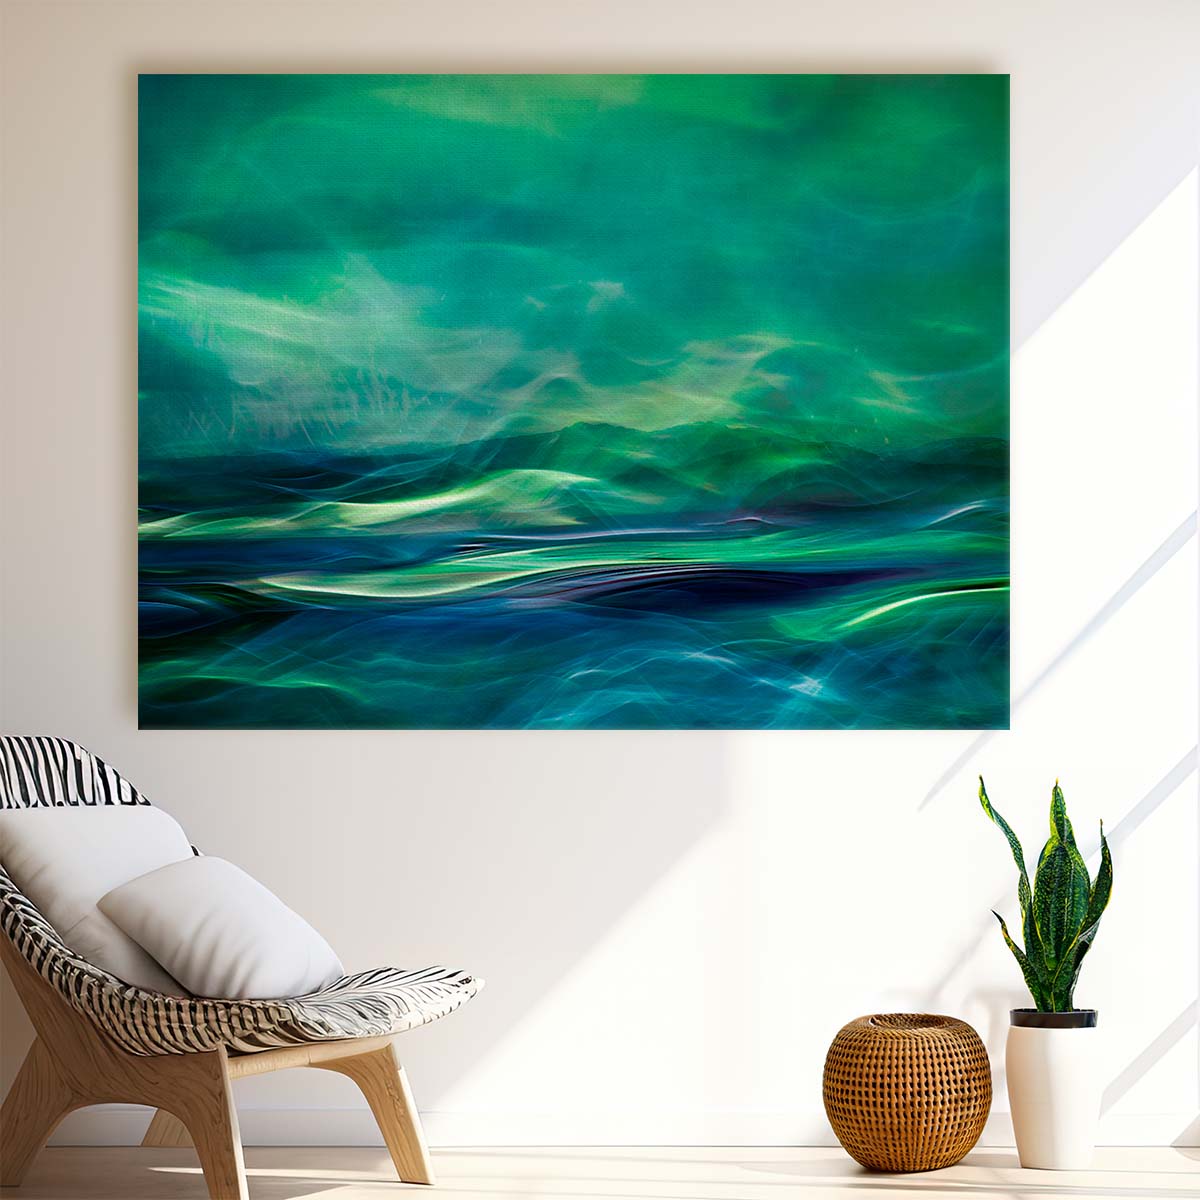 Enchanted Norway Aurora Seascape Dream Wall Art by Luxuriance Designs. Made in USA.